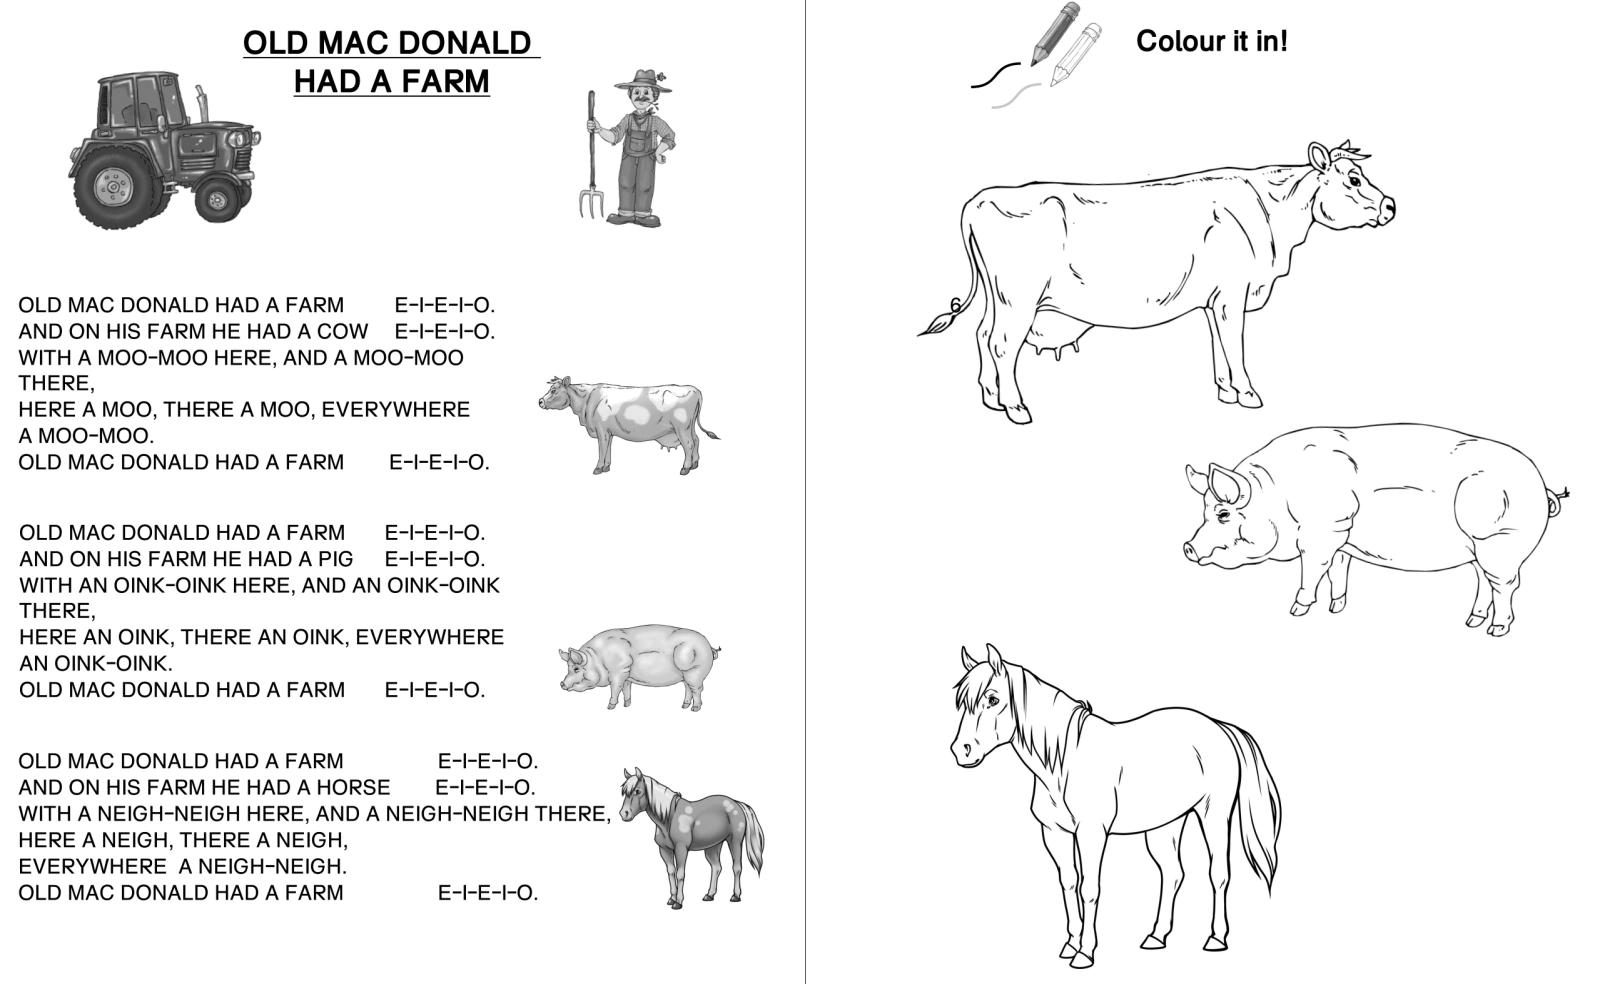 ab engl animals song oldmd • Old Mac Donald has a Farm